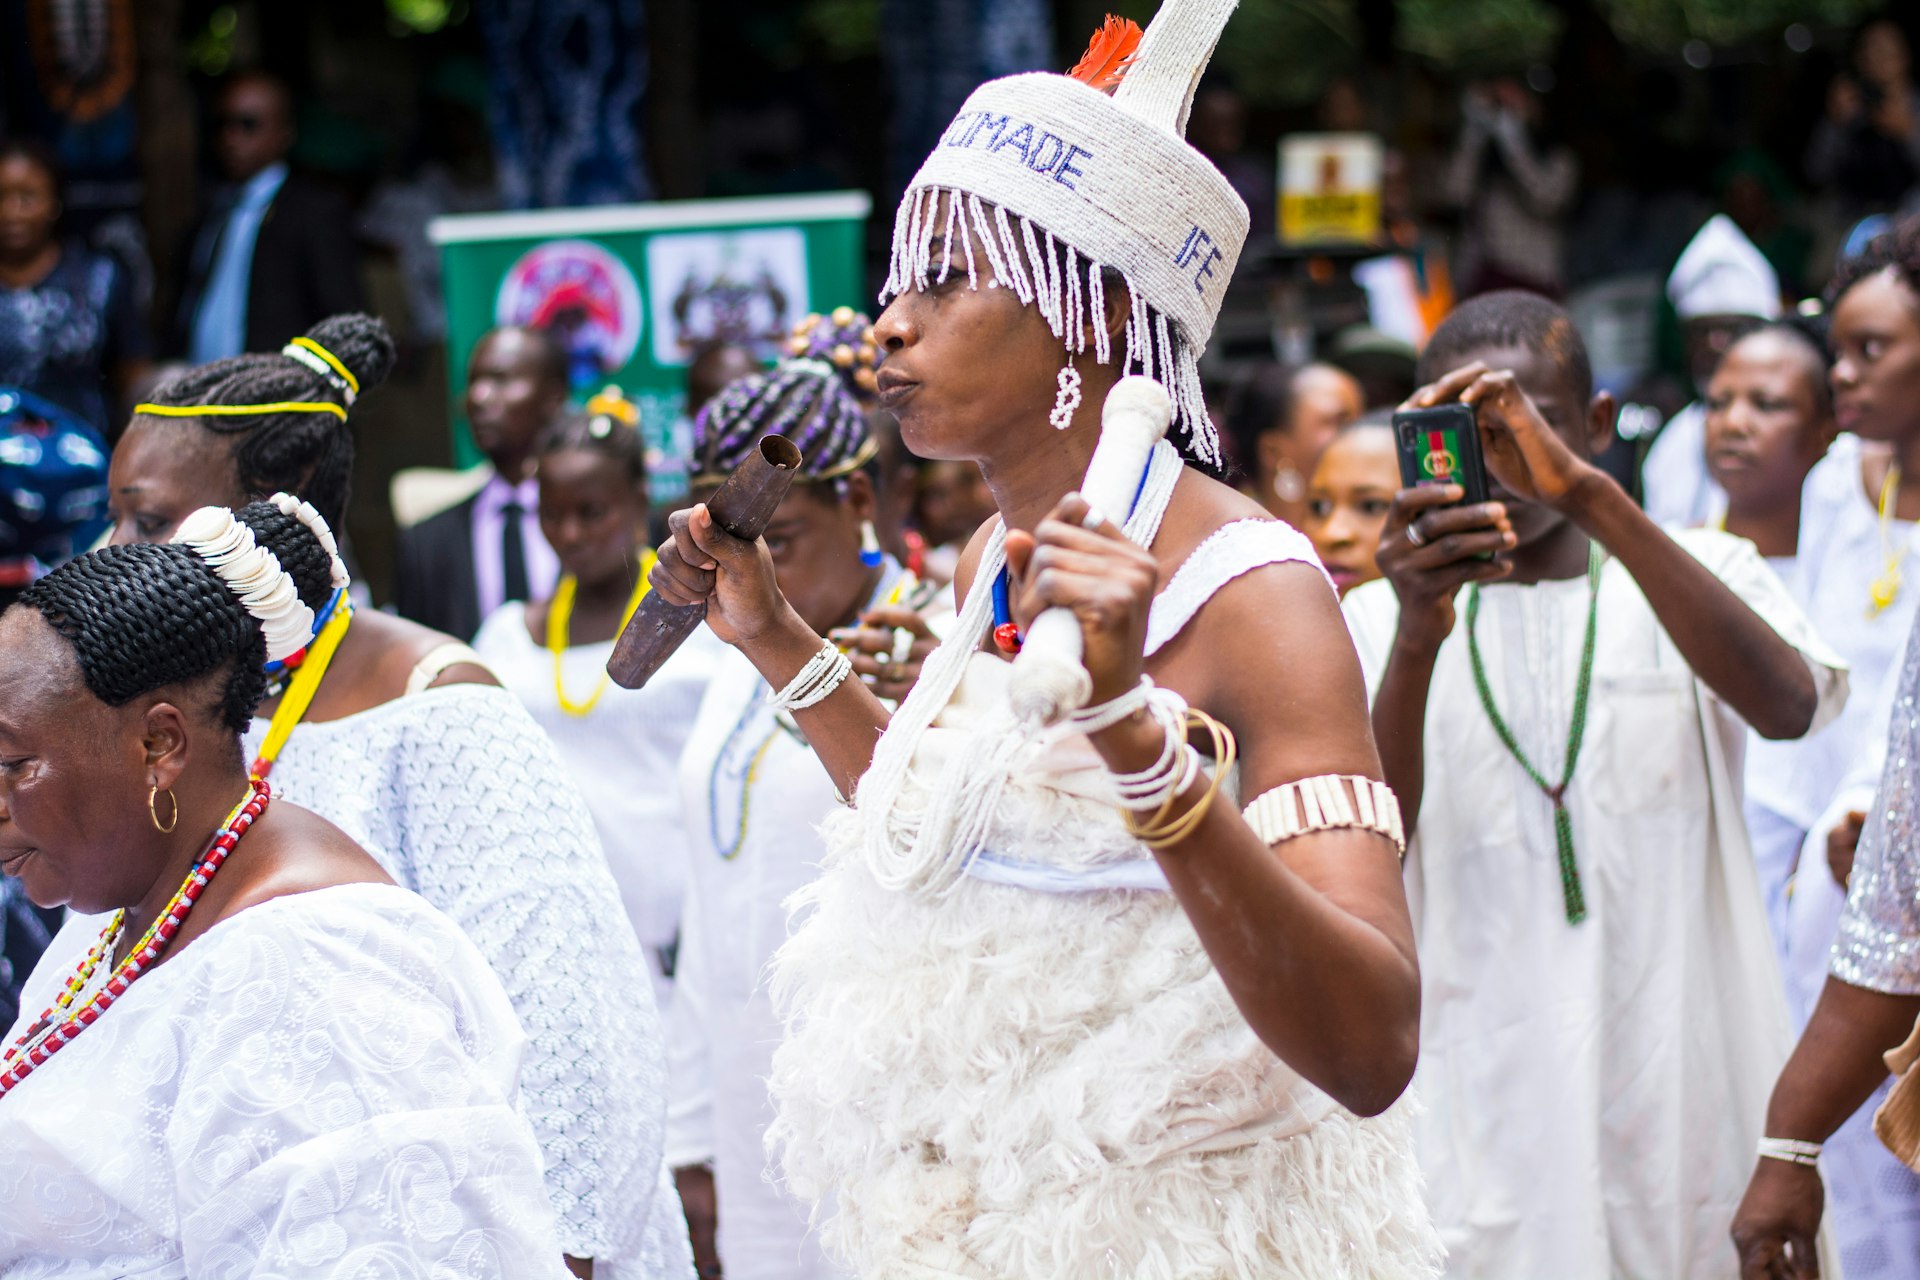 Osun worshippers, dressed all in white and holding instruments, at Osun Osogbo festival Nigeria